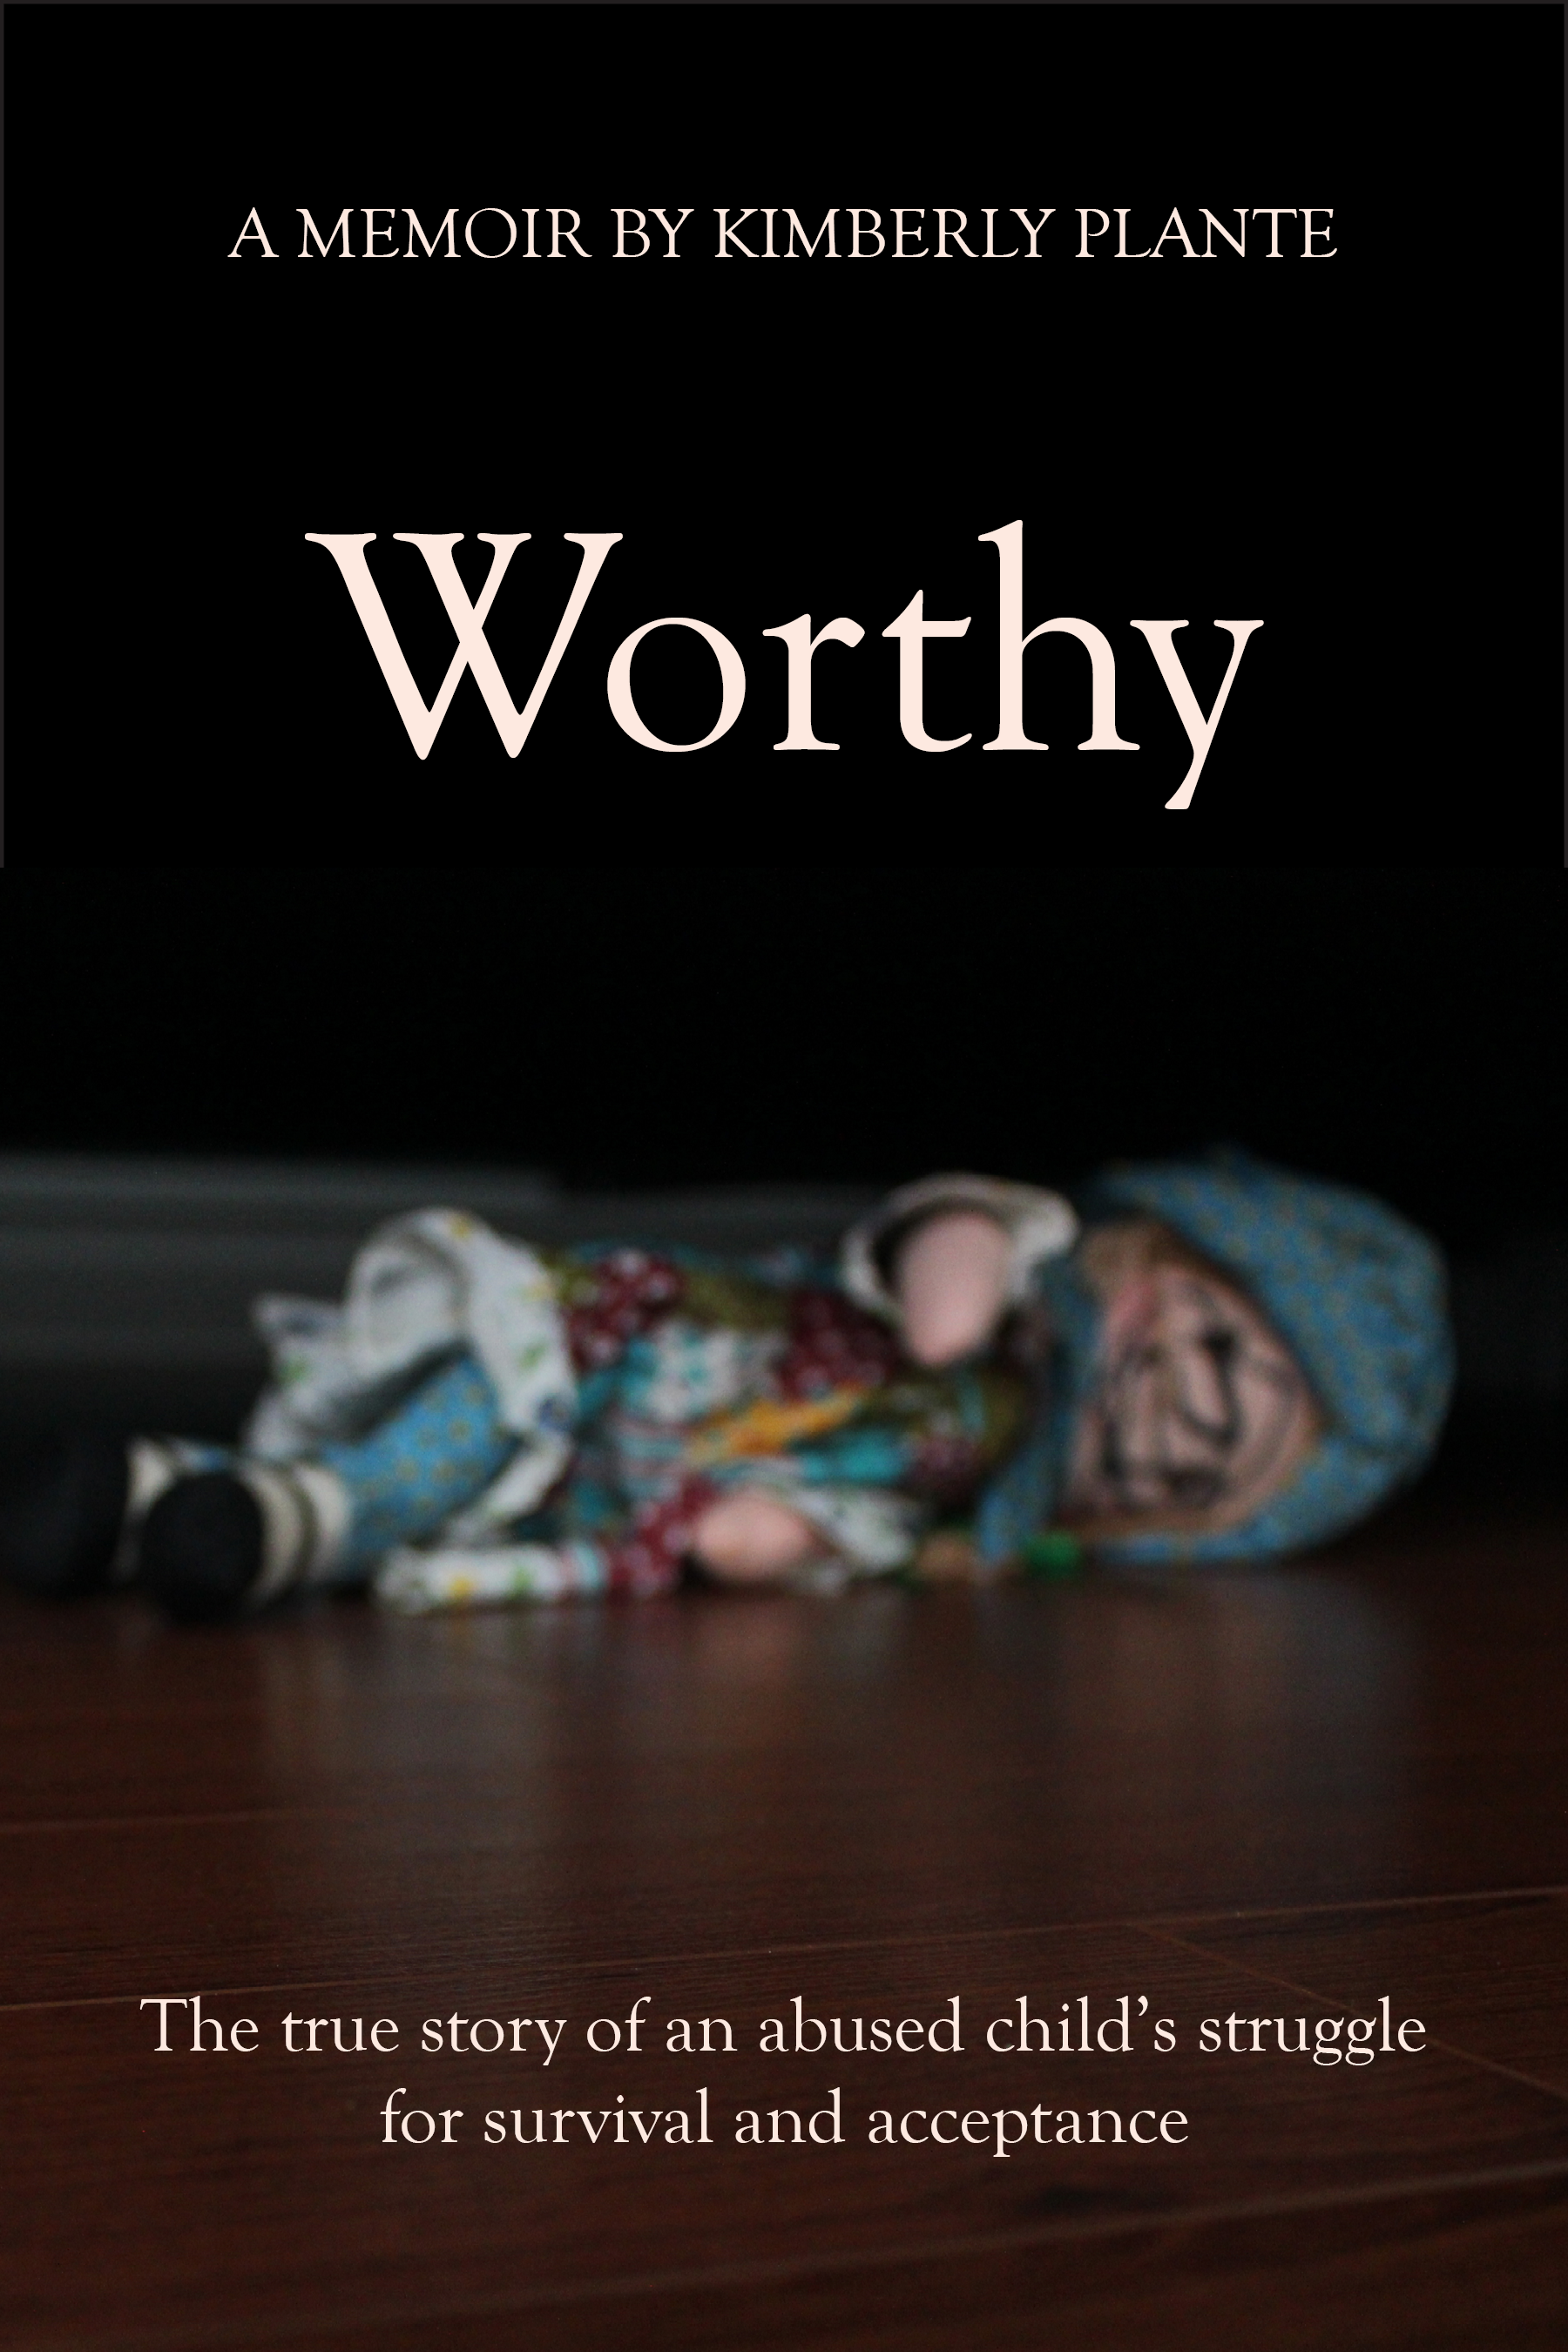 Worthy is a memoir by Kimberly Plante